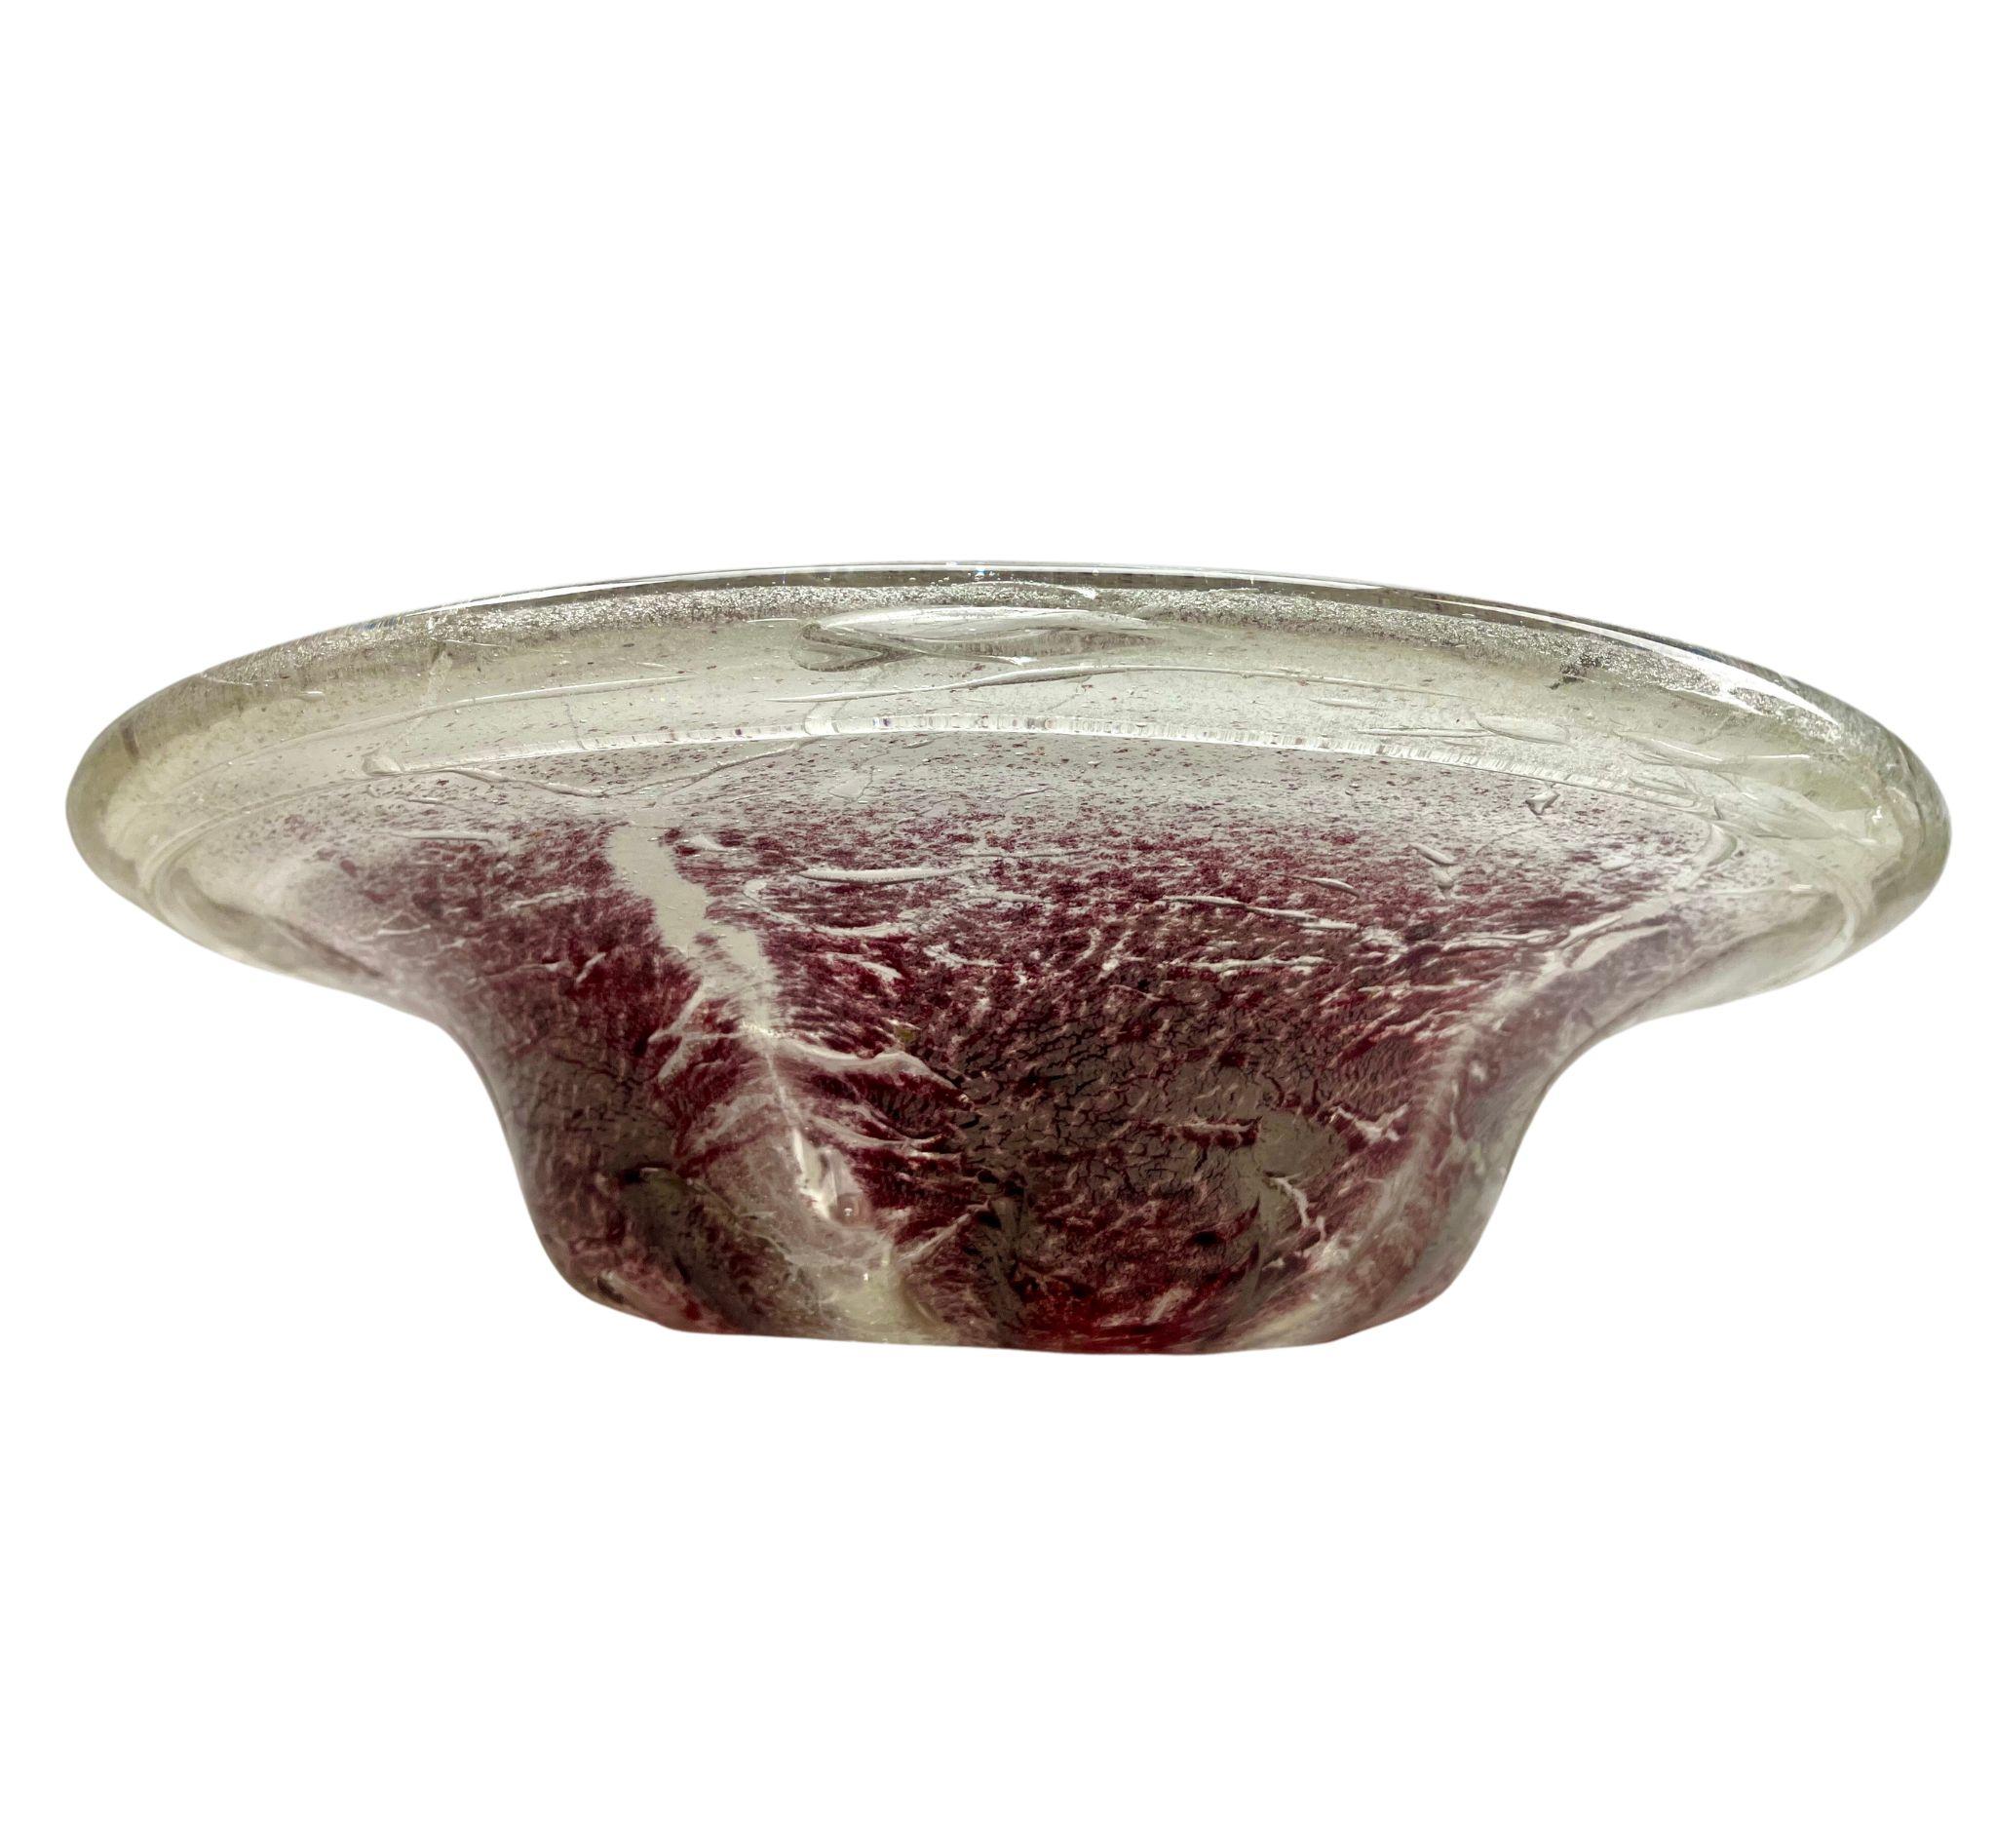 Art Deco Large'Ikora' Art Glass Bowl, Produced, by WMF in Germany, 1930s by Karl Wiedmann For Sale